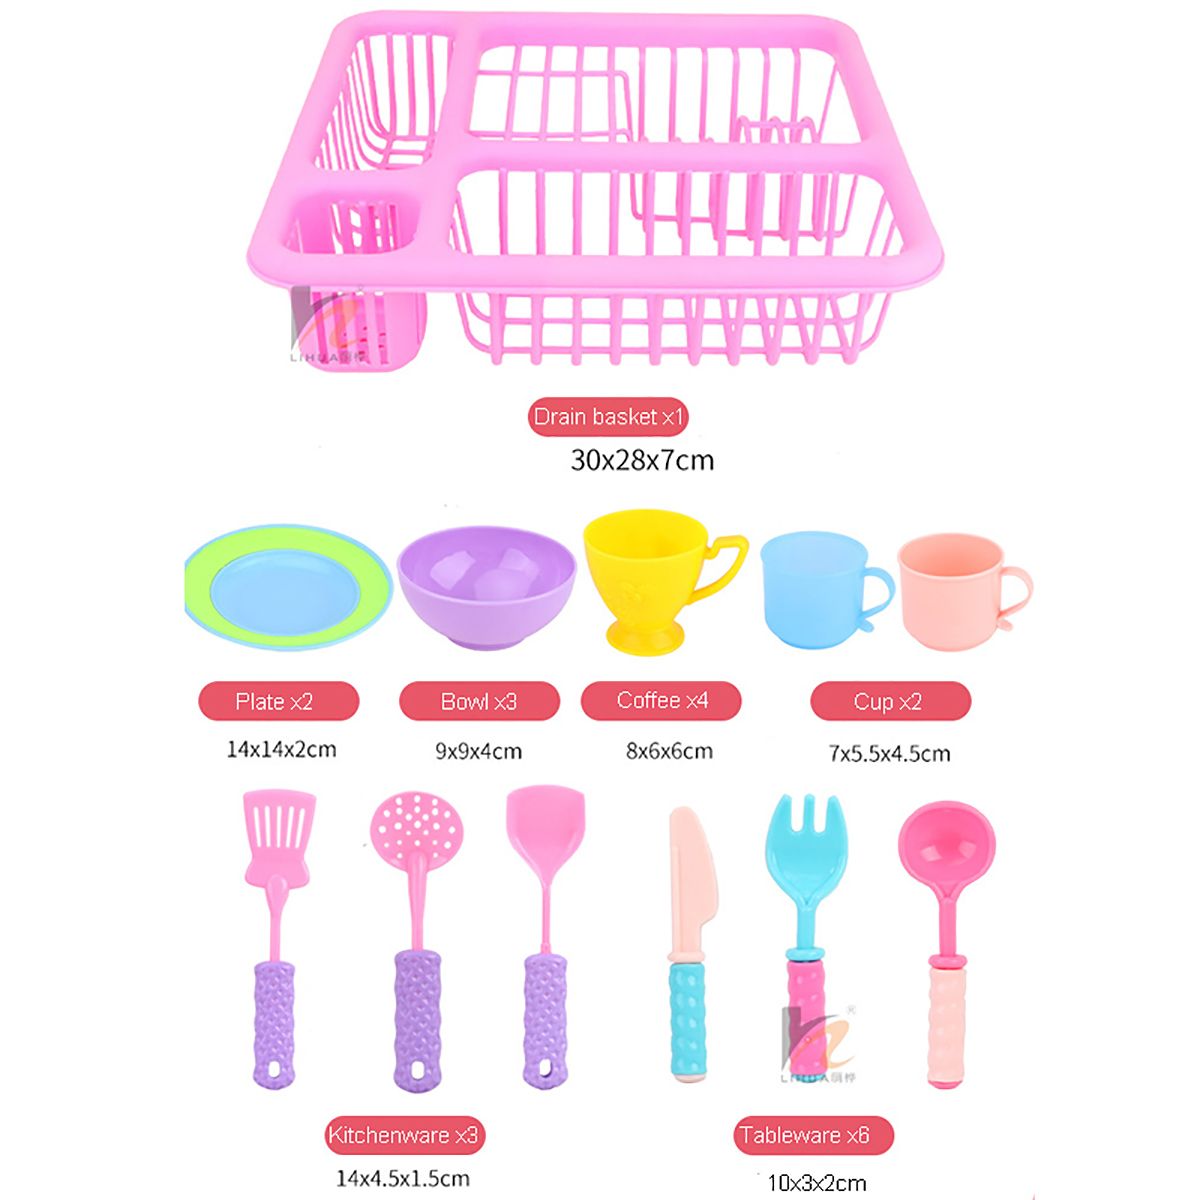 21PCS-Kids-Pretend-Play-Dishes-Kitchen-Playset-Wash-amp-Dry-Tableware-Rack-Toys-1629829